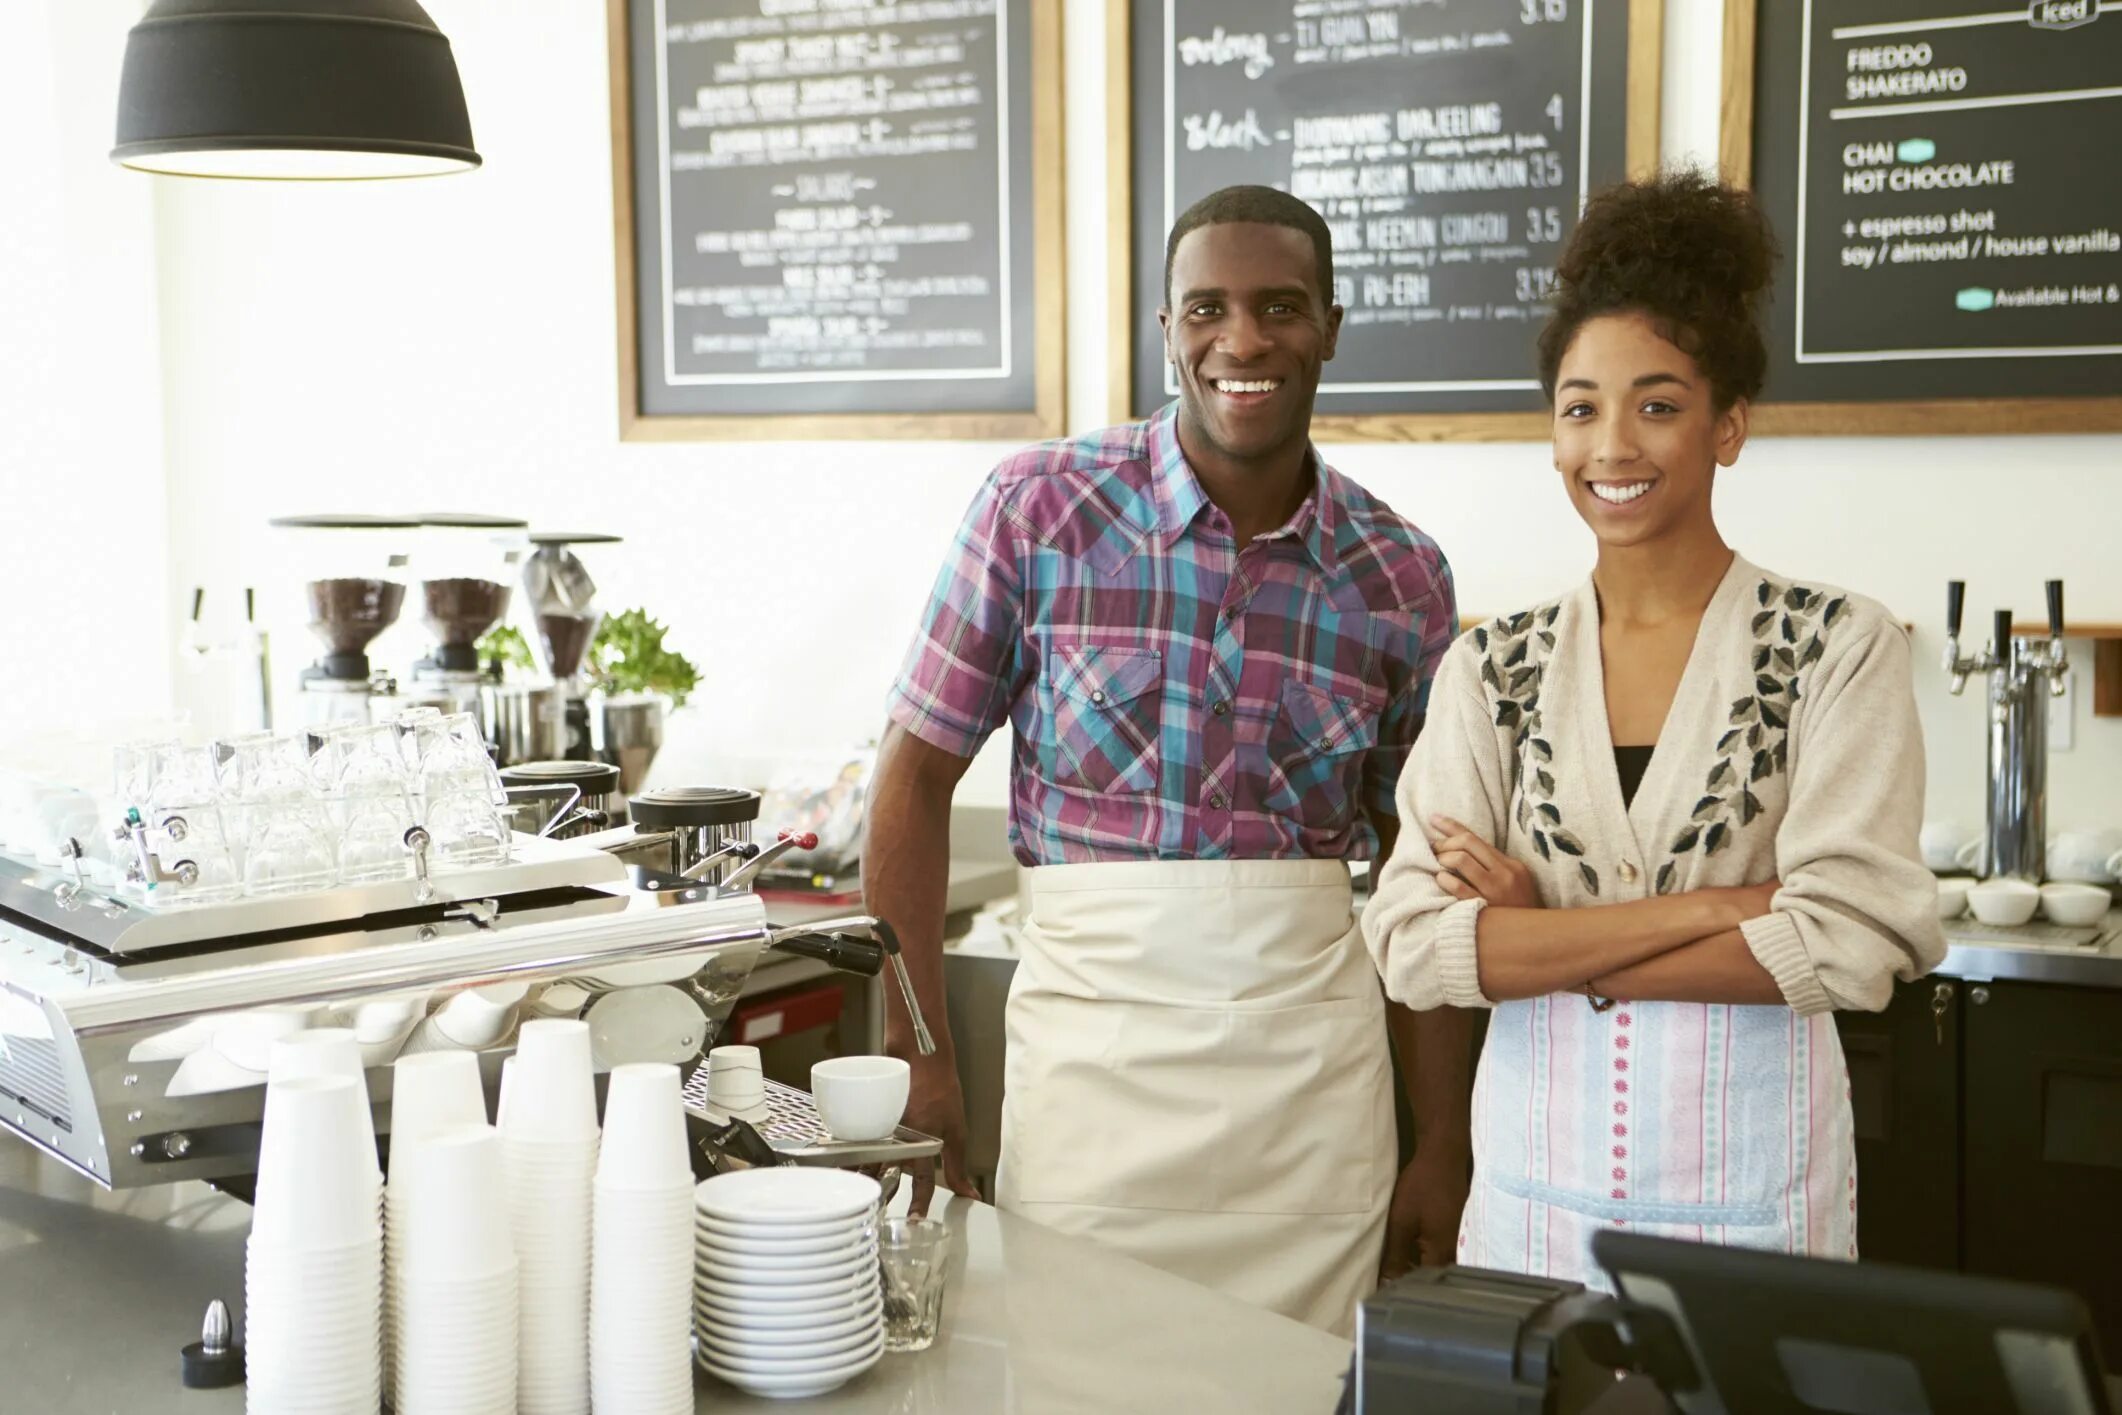 Small Business and Entrepreneurship. Entrepreneur Coffee shop. Small Business owner. Shop owner. Mine own business